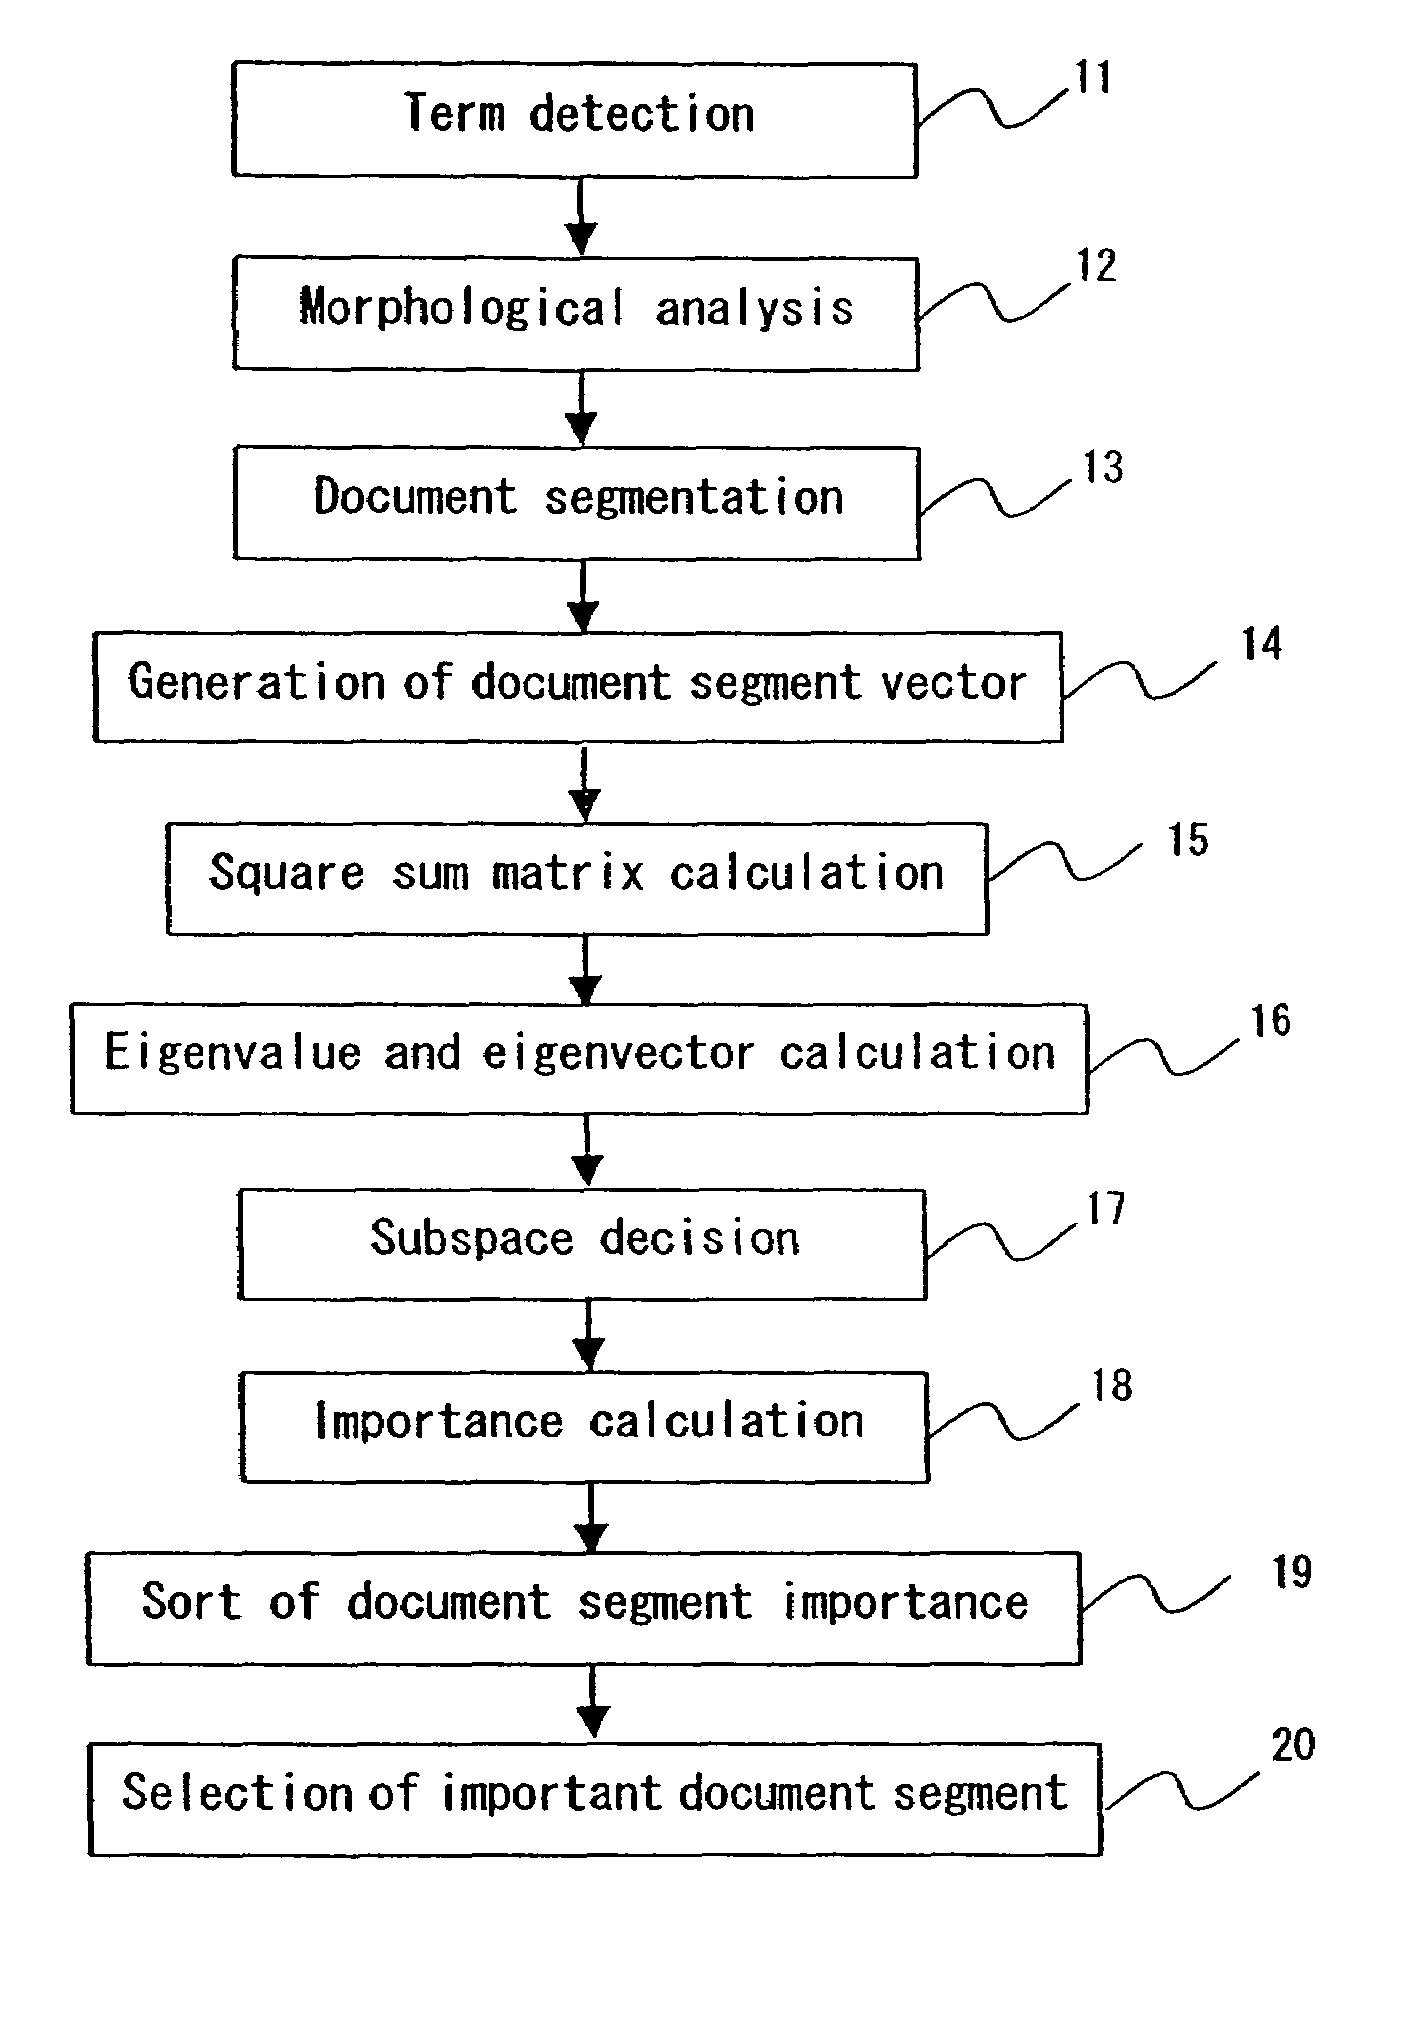 Method of vector analysis for a document